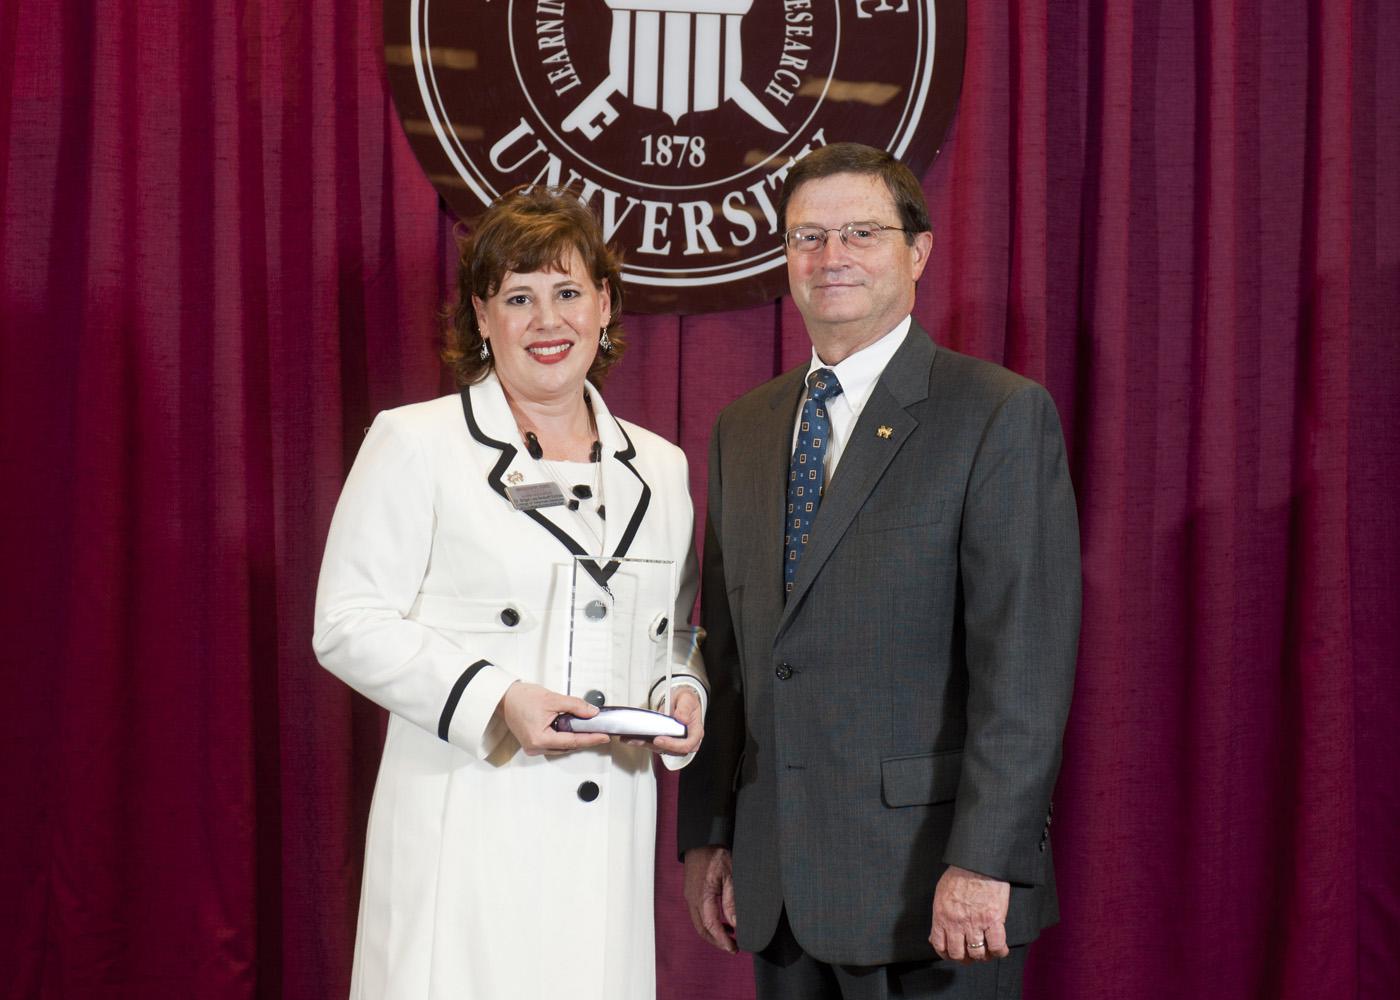 Deputy State Veterinarian and Public Health Veterinarian Dr. Brigid Elchos, left, accepts her alumnus of the year award from Dr. Kent Hoblet, dean of Mississippi State University College of Veterinary Medicine. Elchos received the honor because of her outstanding achievements and leadership. (Photo by MSU University Relations/Megan Bean)